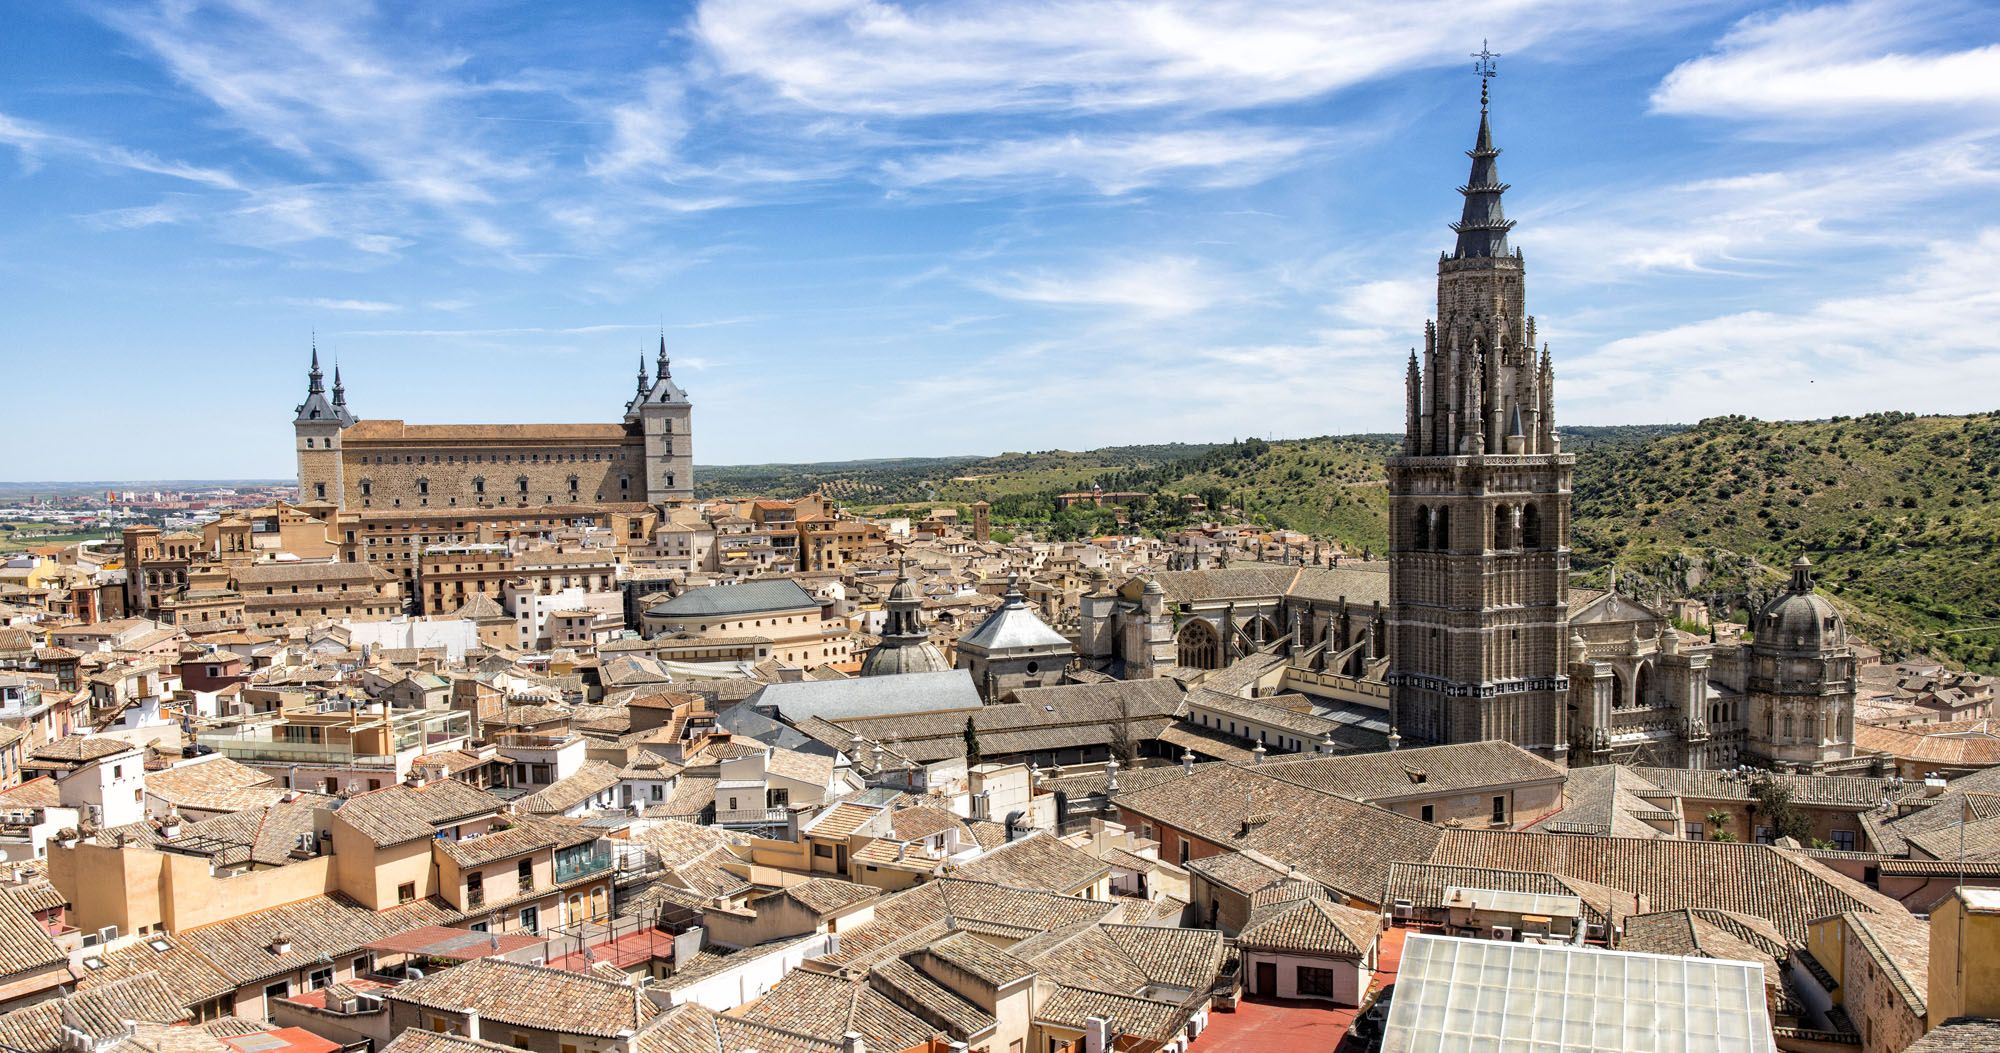 Featured image for “One Perfect Day in Toledo: Day Trip from Madrid”